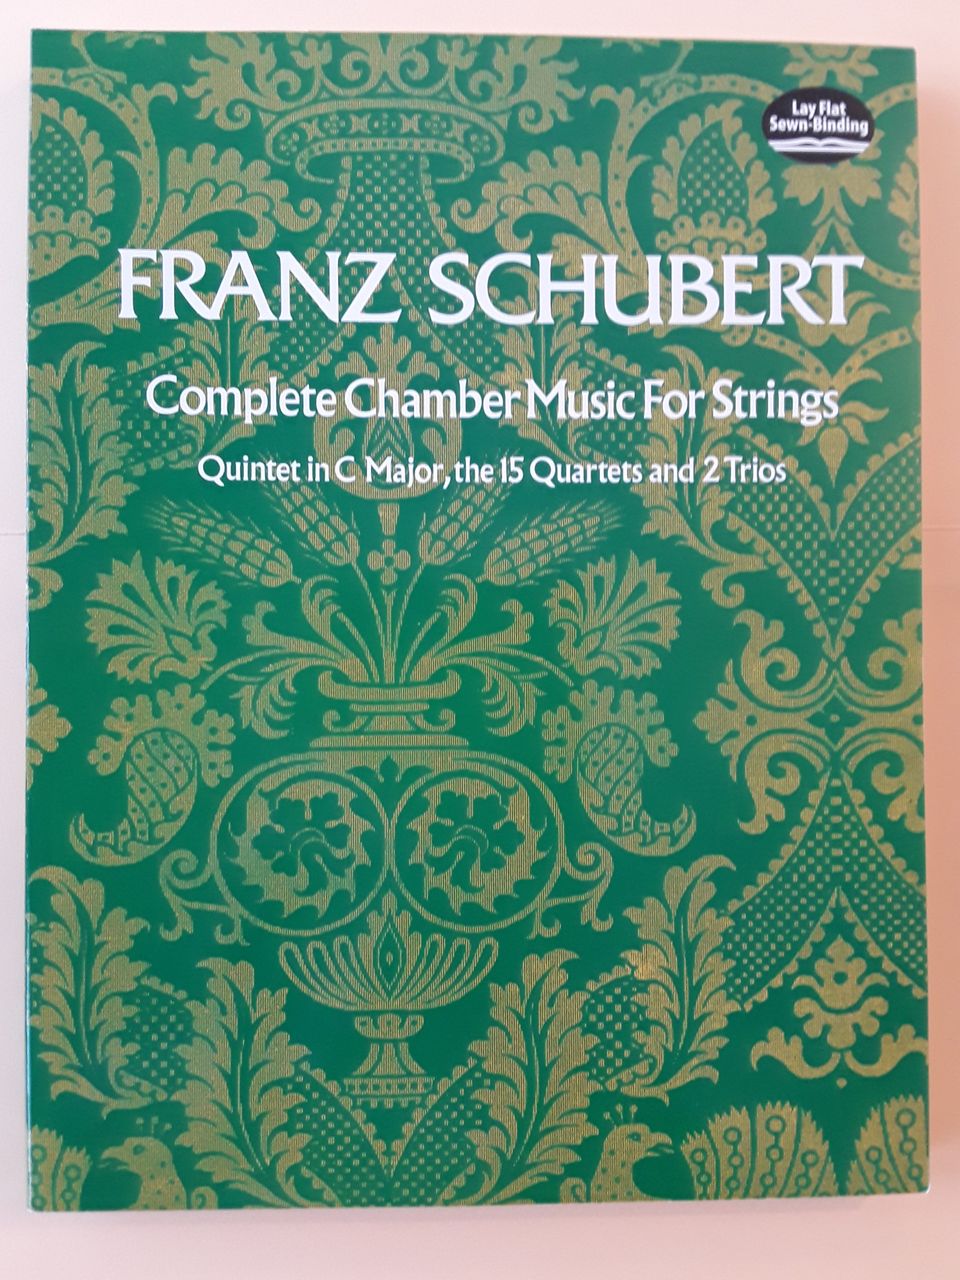 Nuotti: Schubert: Complete chamber music for strings